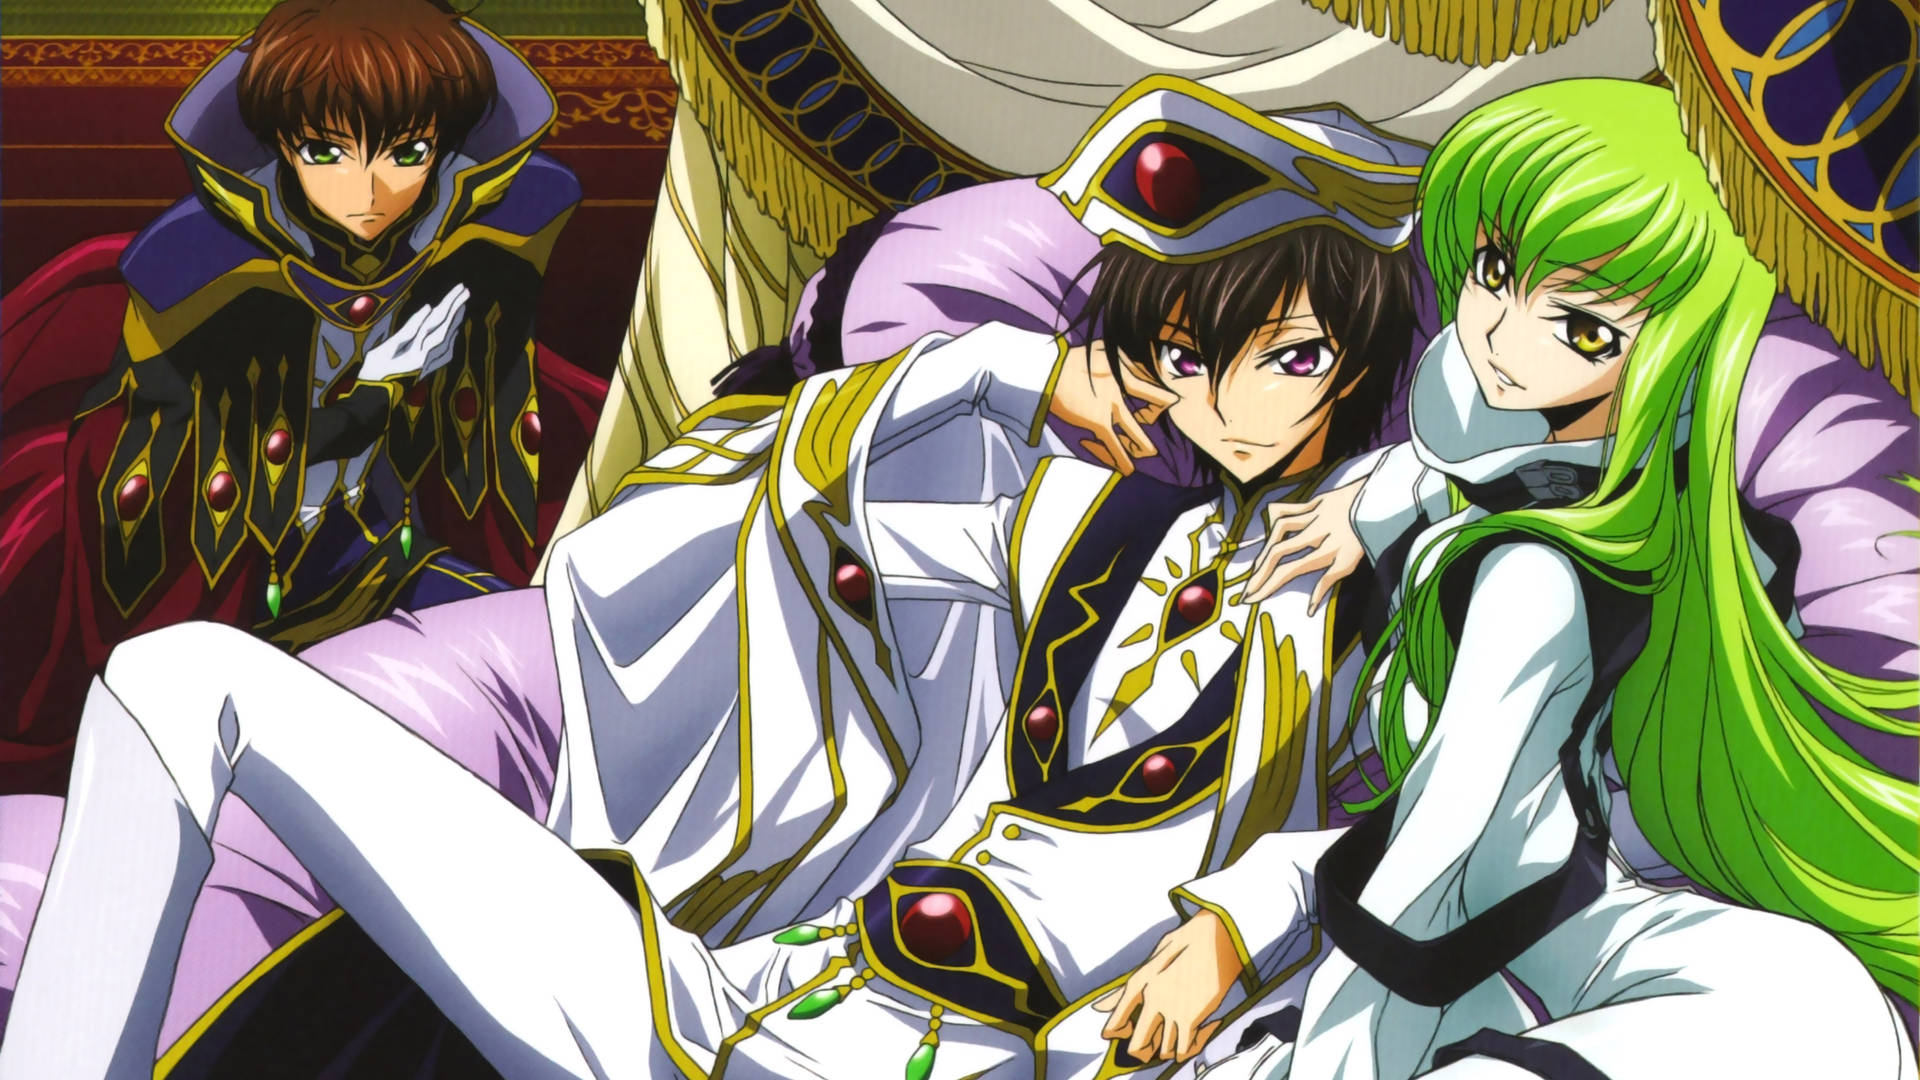 Lelouch Lamperouge From Code Geass Illustrated Art Wallpaper